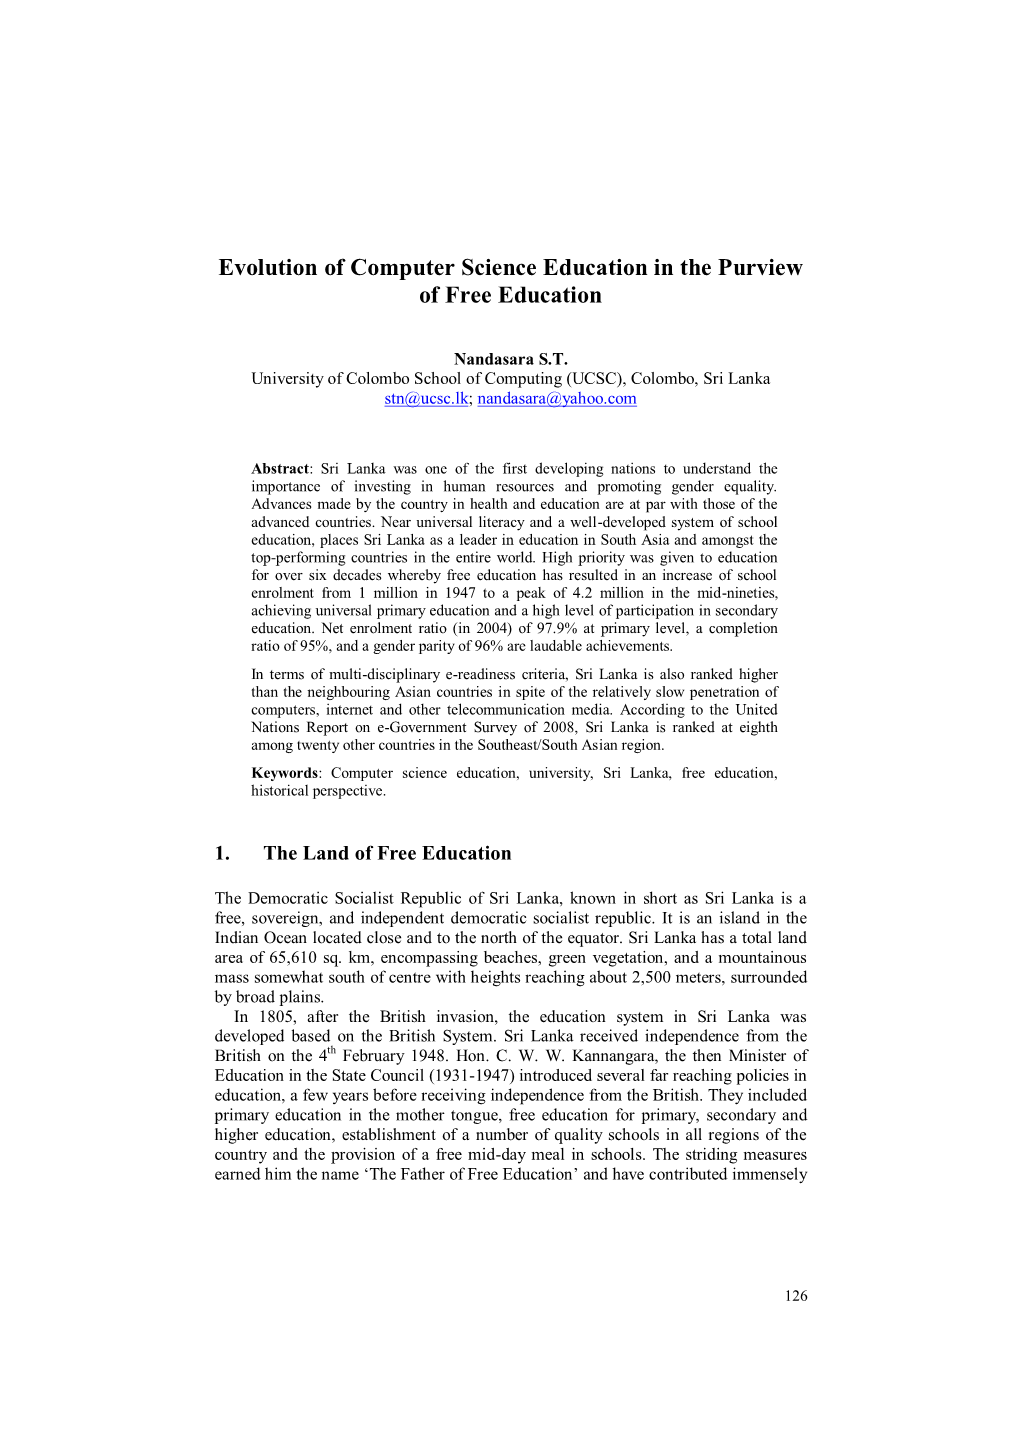 Evolution of Computer Science Education in the Purview of Free Education